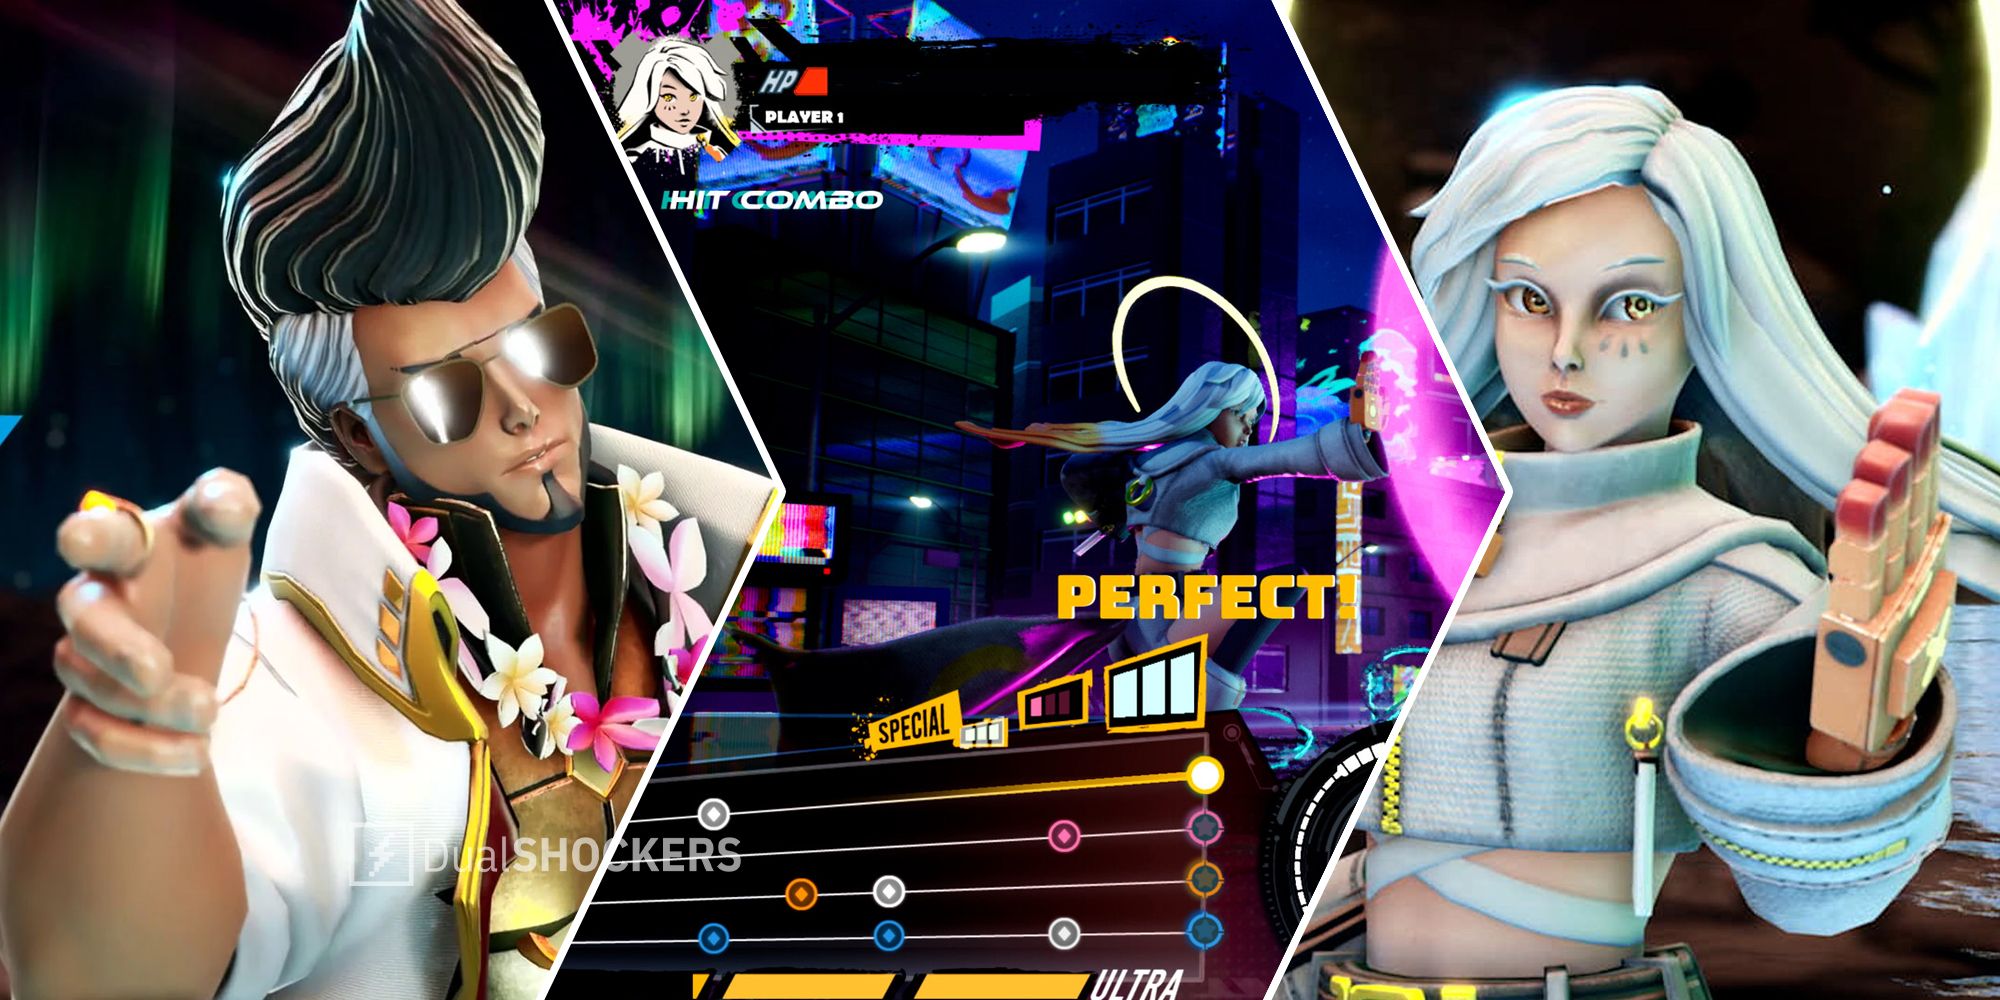 Rhythm-based fighting game God Of Rock gameplay and characters